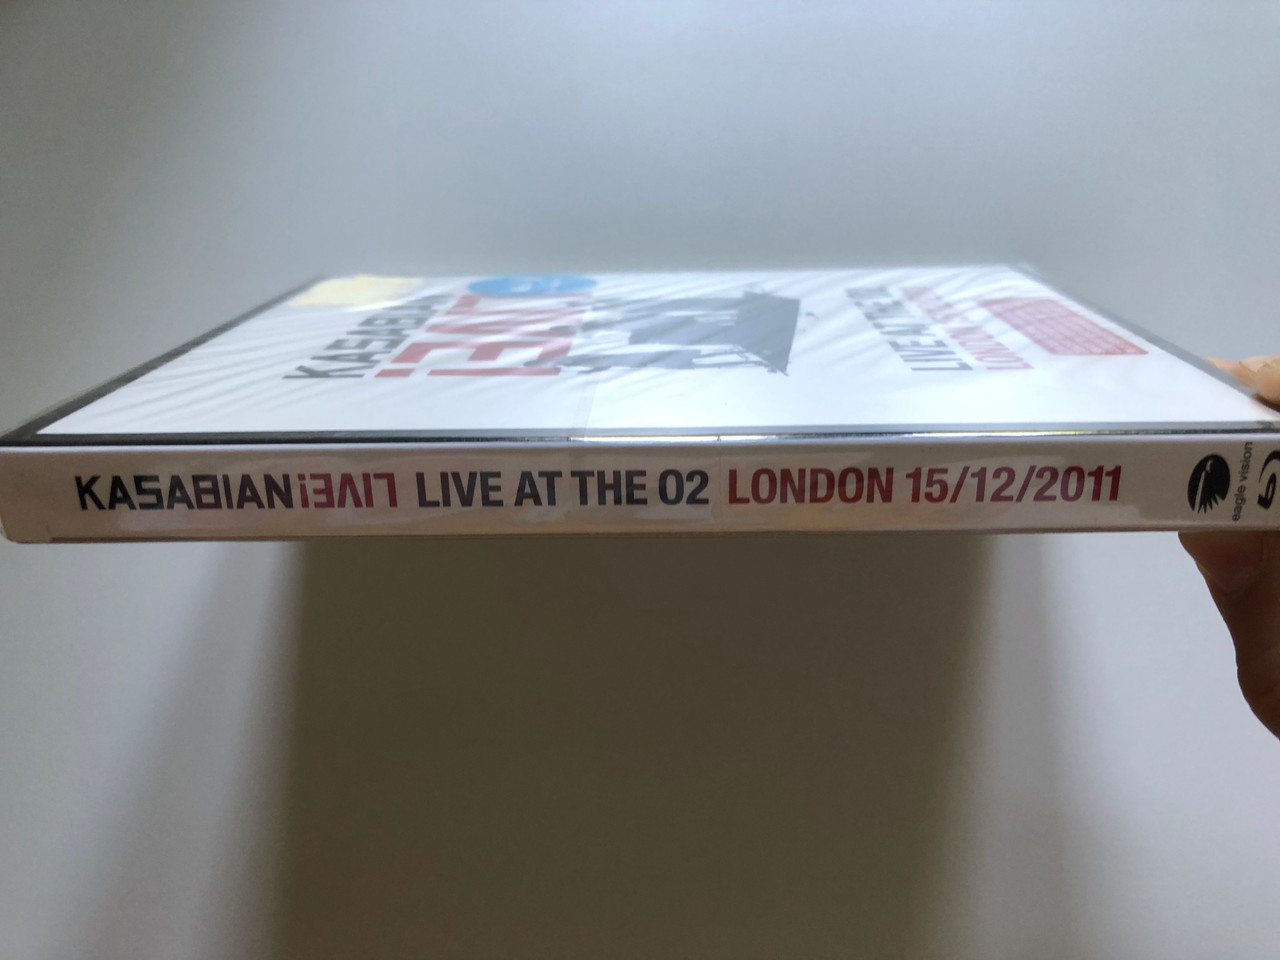 https://cdn10.bigcommerce.com/s-62bdpkt7pb/products/0/images/256202/Kasabian_Live_Live_At_The_O2_London_15122011_Contains_CD_Of_Highlights_From_The_Concert_Includes_Fire_Empire_L._S._F._Shoot_The_Runner_Days_Are_Forgotten_Clubfoot_Eagle_Vision_Au_3__98585.1665658543.1280.1280.JPG?c=2&_gl=1*1ec24zm*_ga*MjA2NTIxMjE2MC4xNTkwNTEyNTMy*_ga_WS2VZYPC6G*MTY2NTY0ODE2NC41OTEuMS4xNjY1NjU4MzAyLjI4LjAuMA..